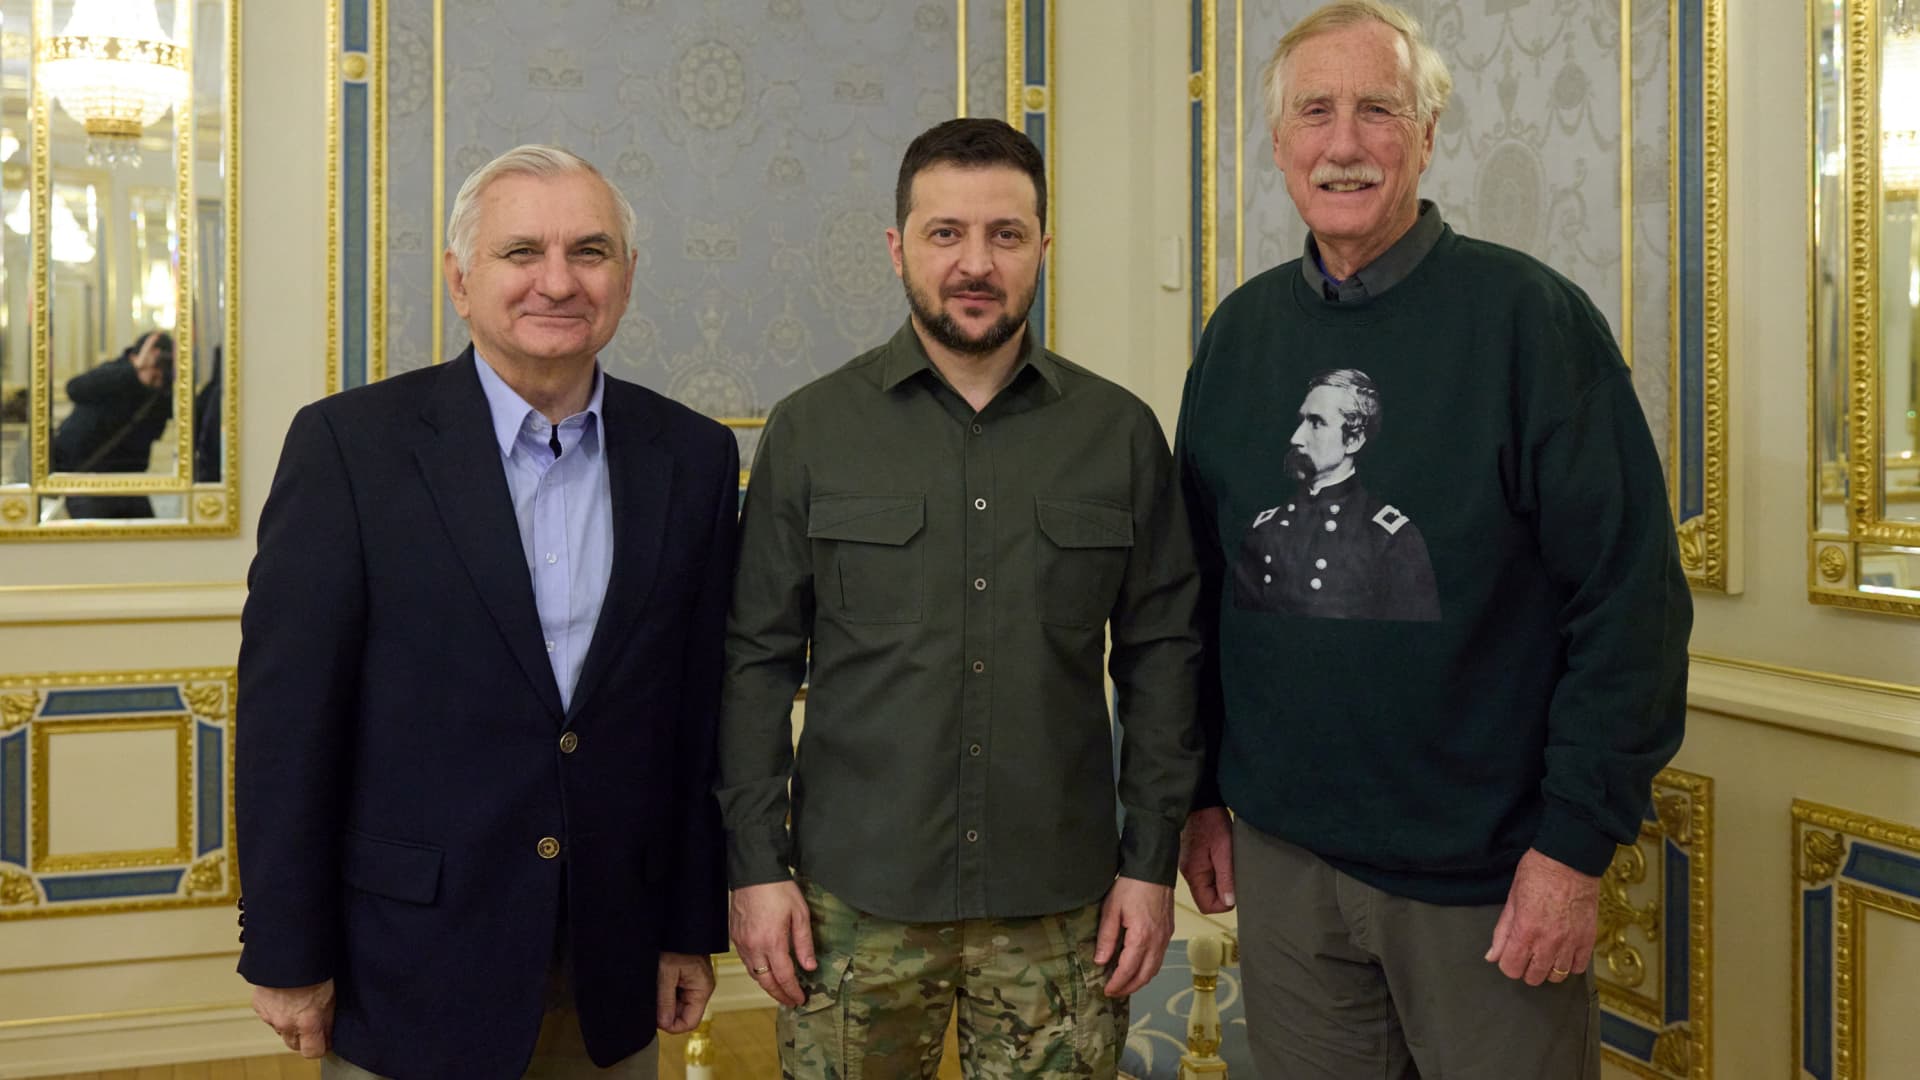 U.S. Senators Jack Reed (D-RI), Chairman of the Senate Armed Services Committee, and Angus King (I-ME) pose for a picture with Ukraine's President Volodymyr Zelenskiy, amid Russia's attack on Ukraine, in Kyiv, Ukraine January 6, 2023. Ukrainian Presidential Press Service/Handout via REUTERS ATTENTION EDITORS - THIS IMAGE HAS BEEN SUPPLIED BY A THIRD PARTY.